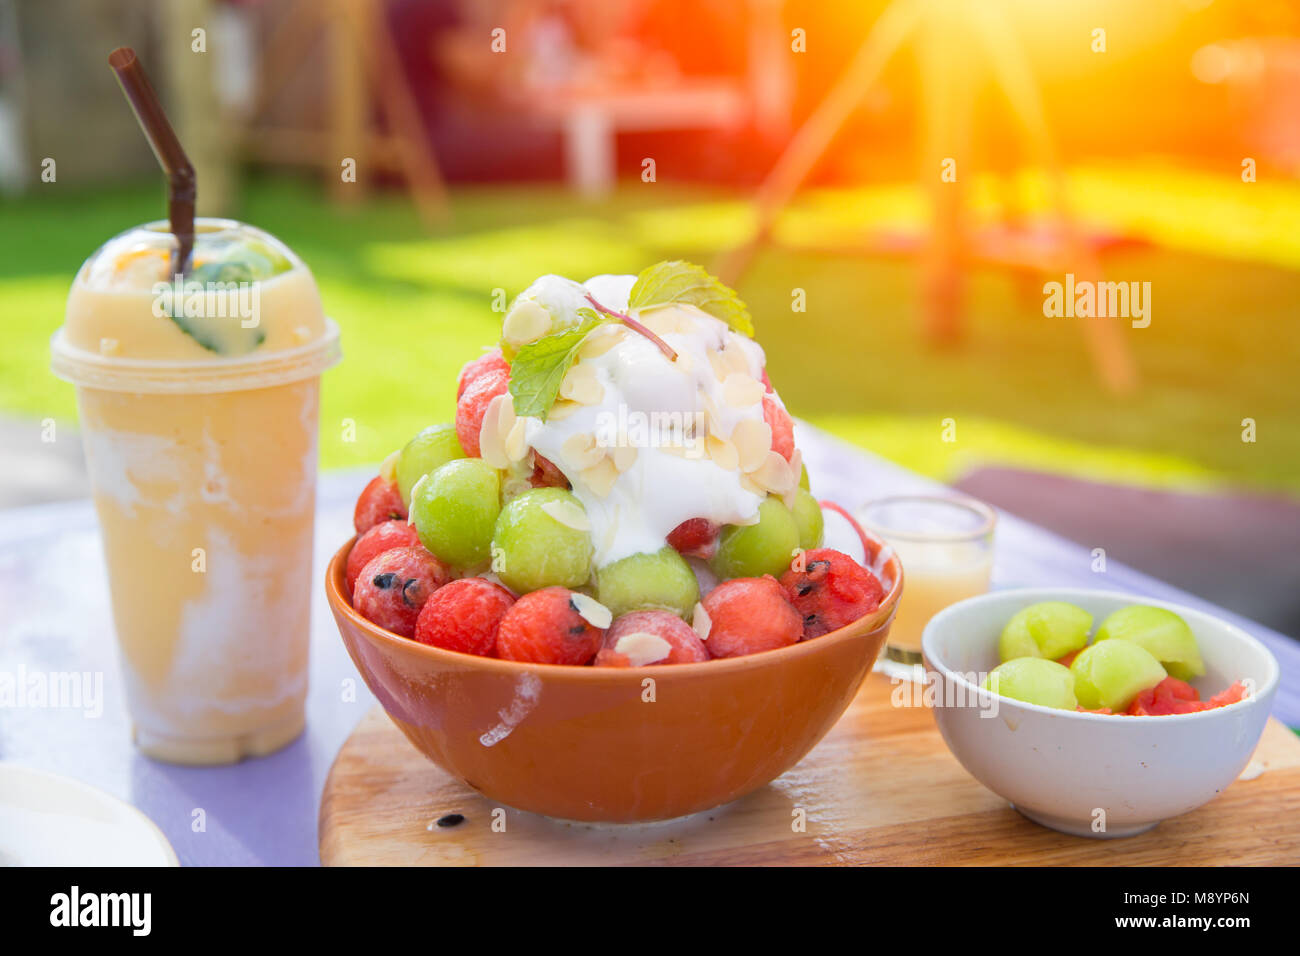 Summer Fruit ice smoothie and Fruity sweet Bingsu good for healthy and cool Stock Photo